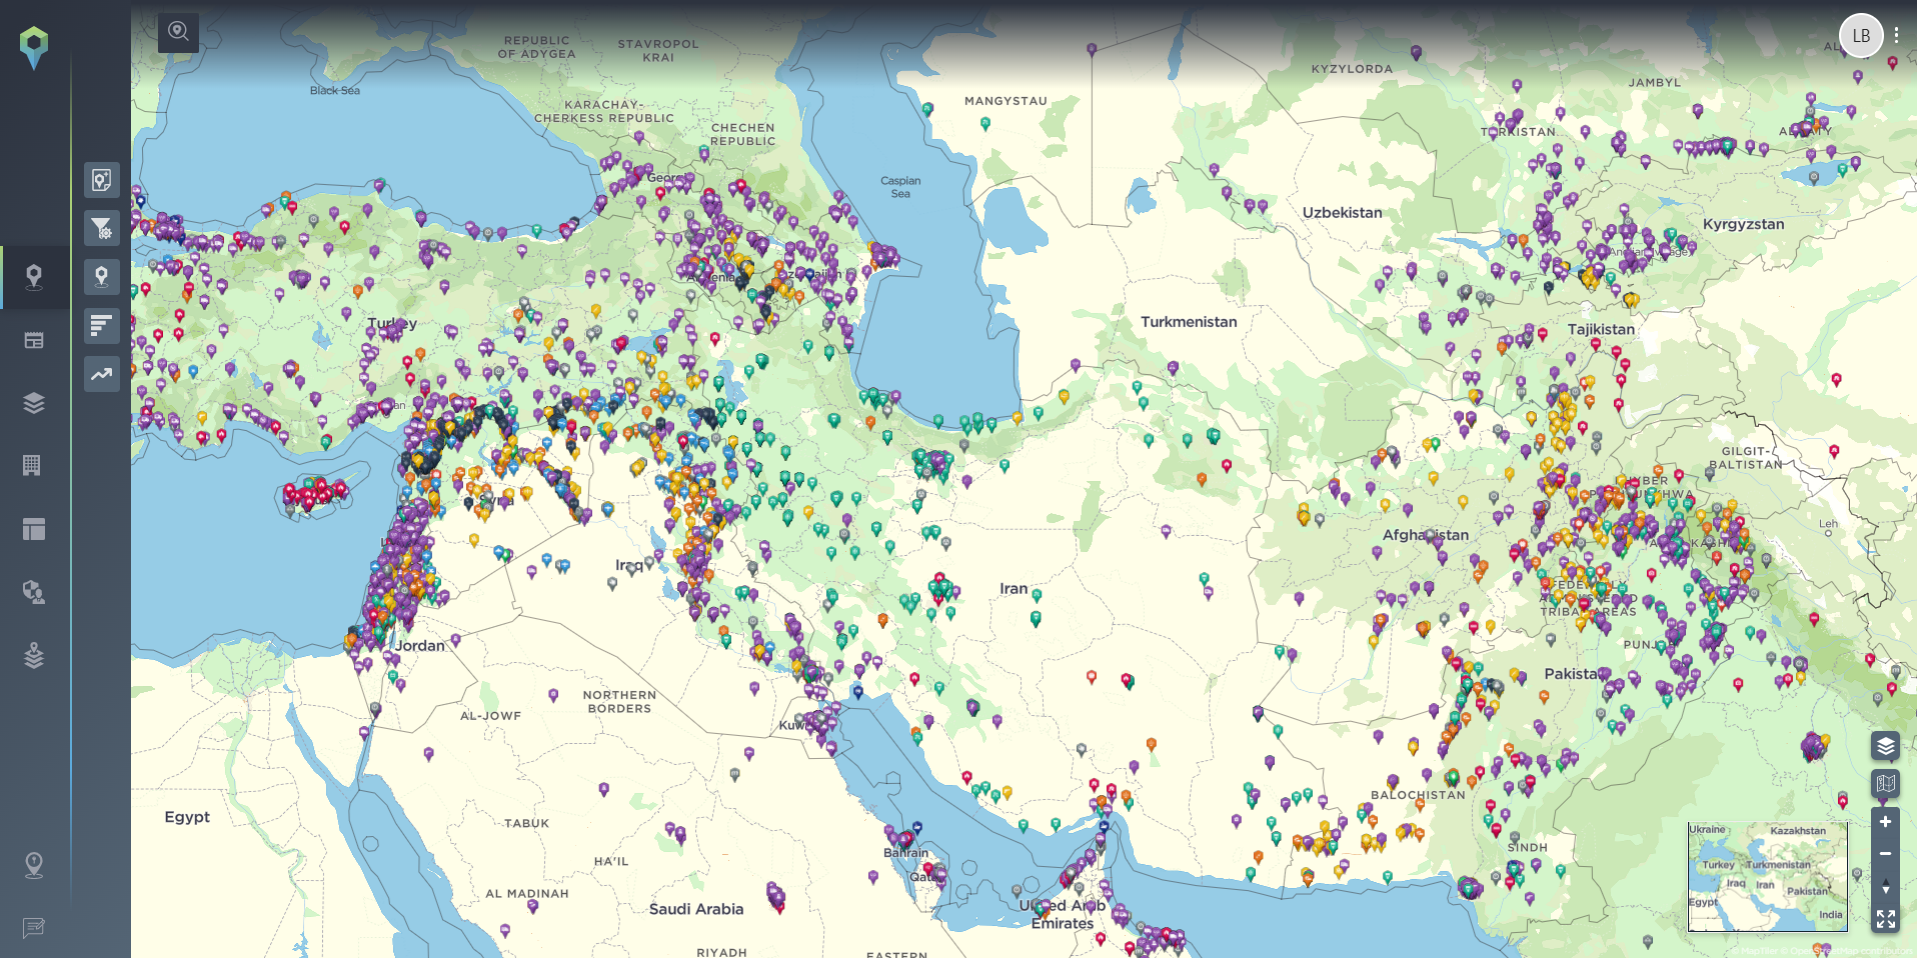 Map of security incidents across Iran and the wider Middle East